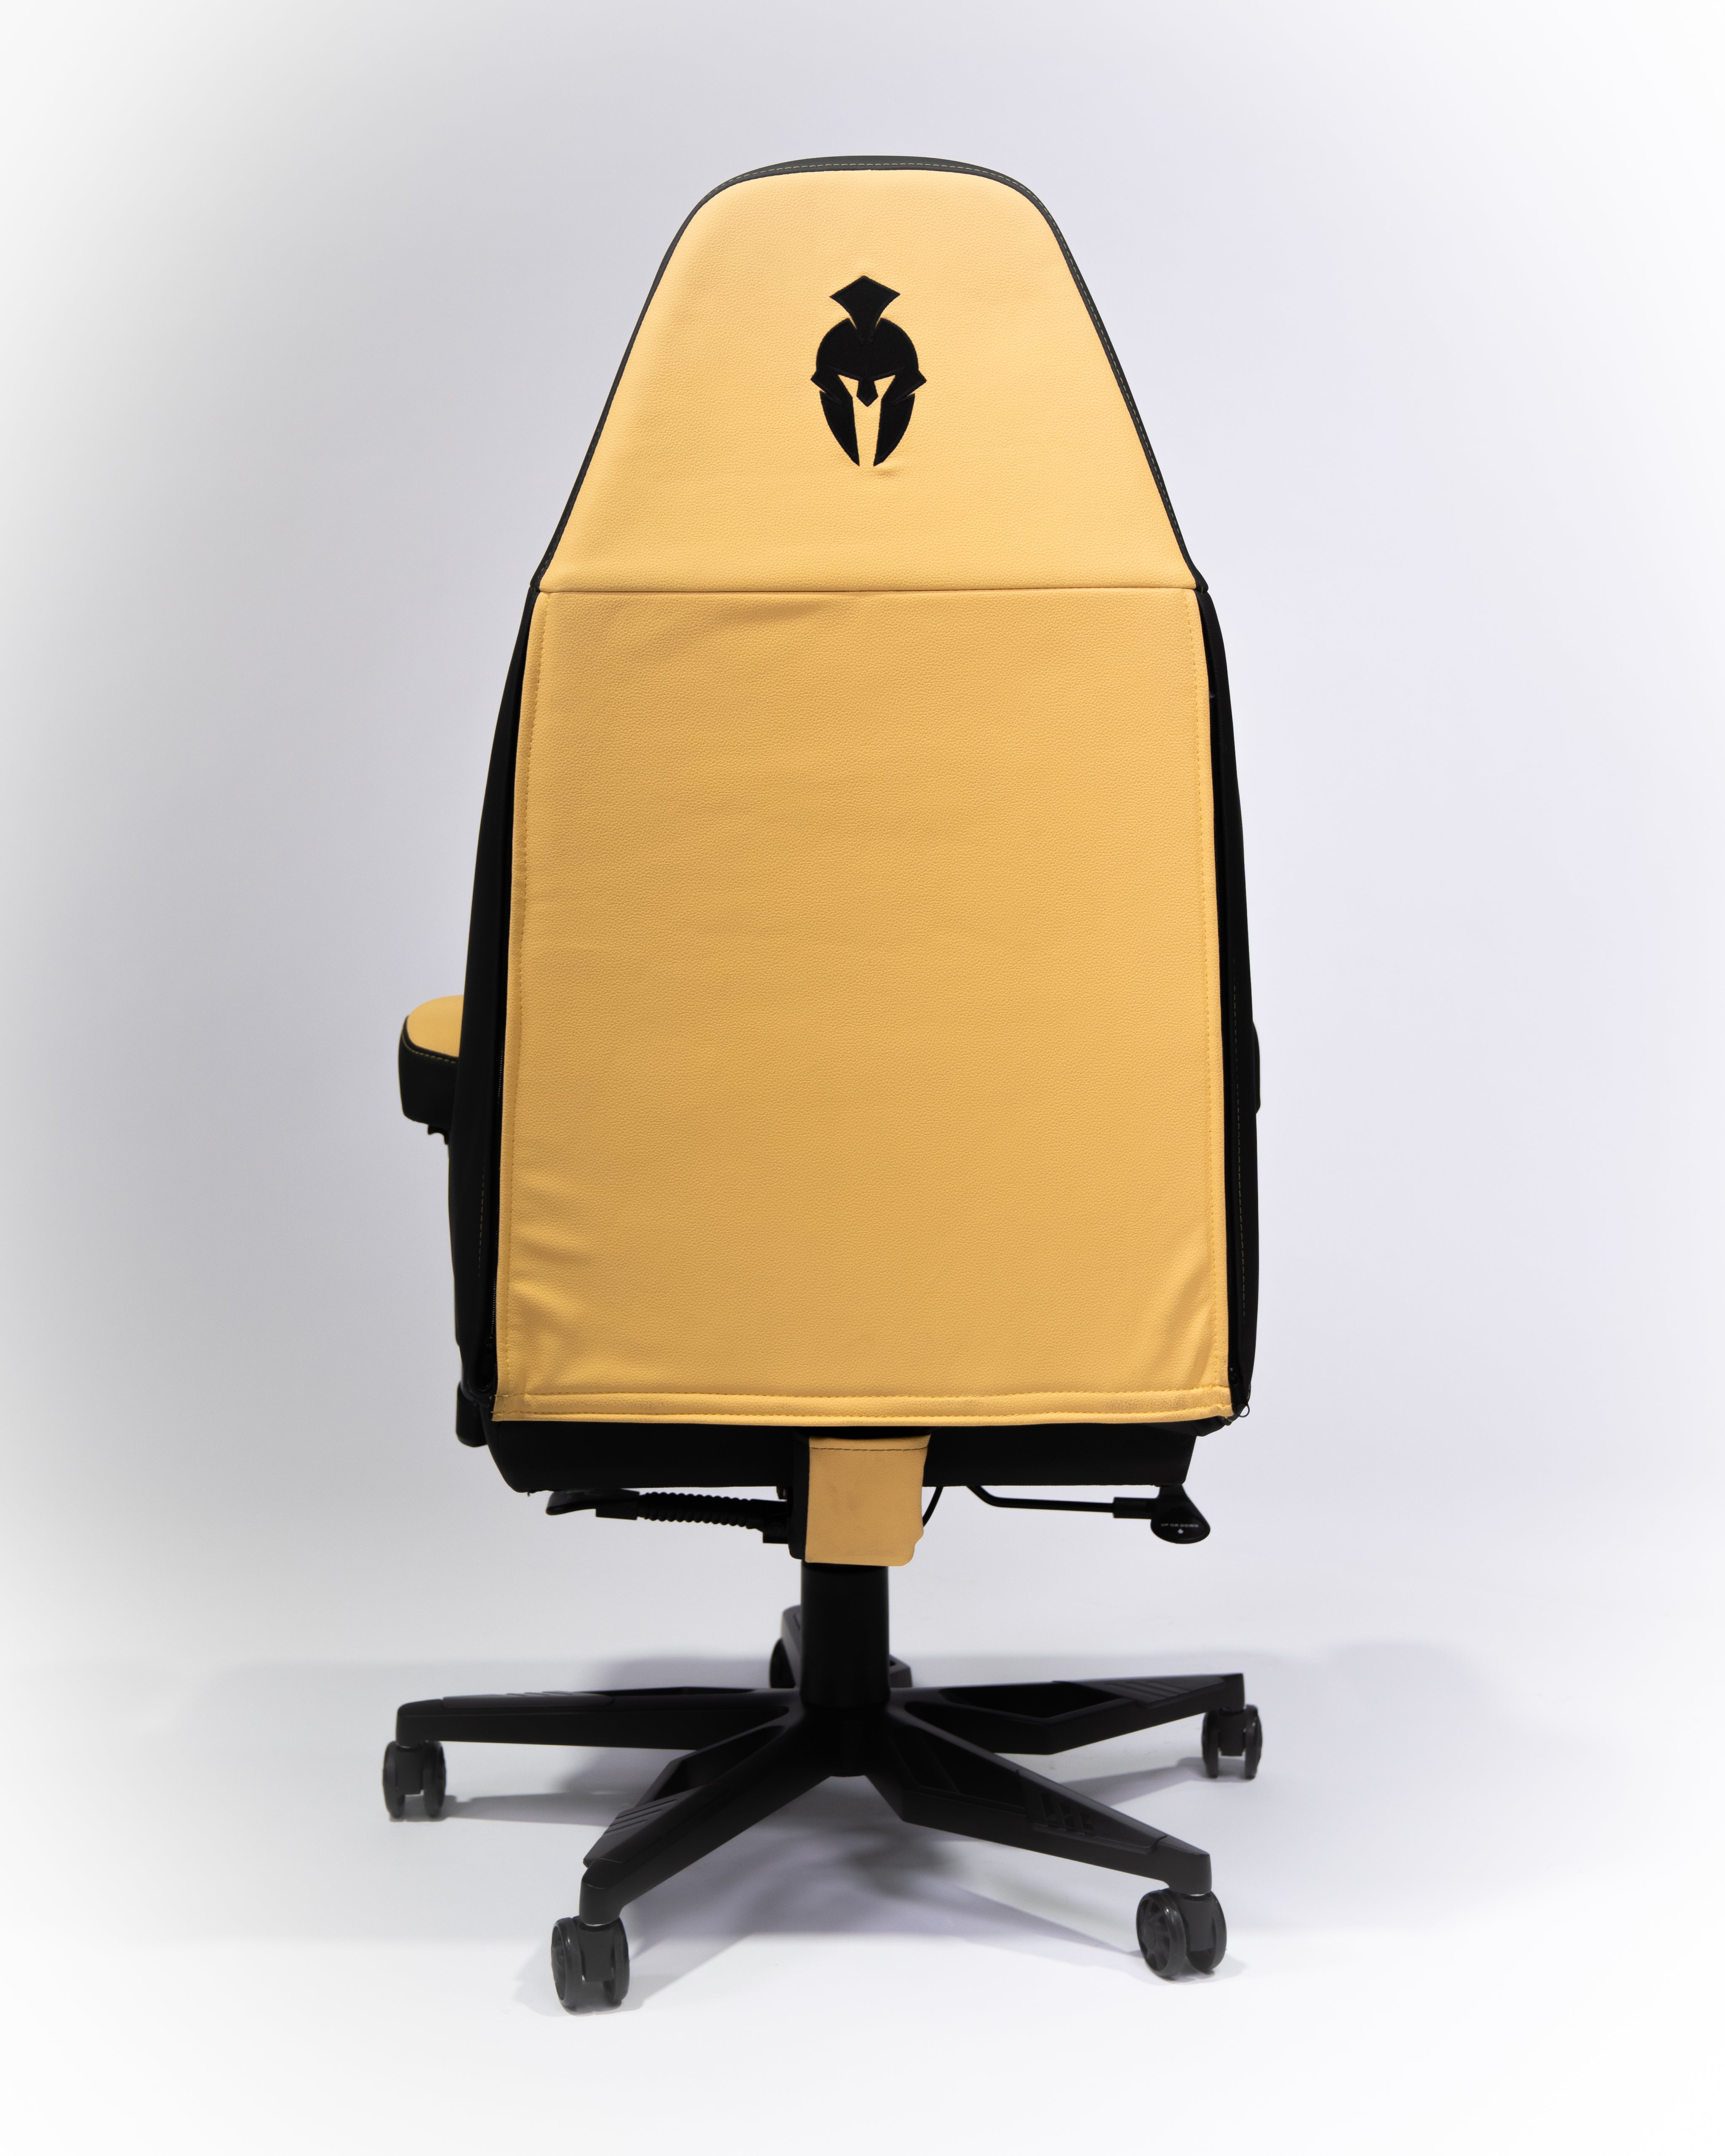 Black and Yellow Premium Haptic Gaming Chair view from the back showing premium material